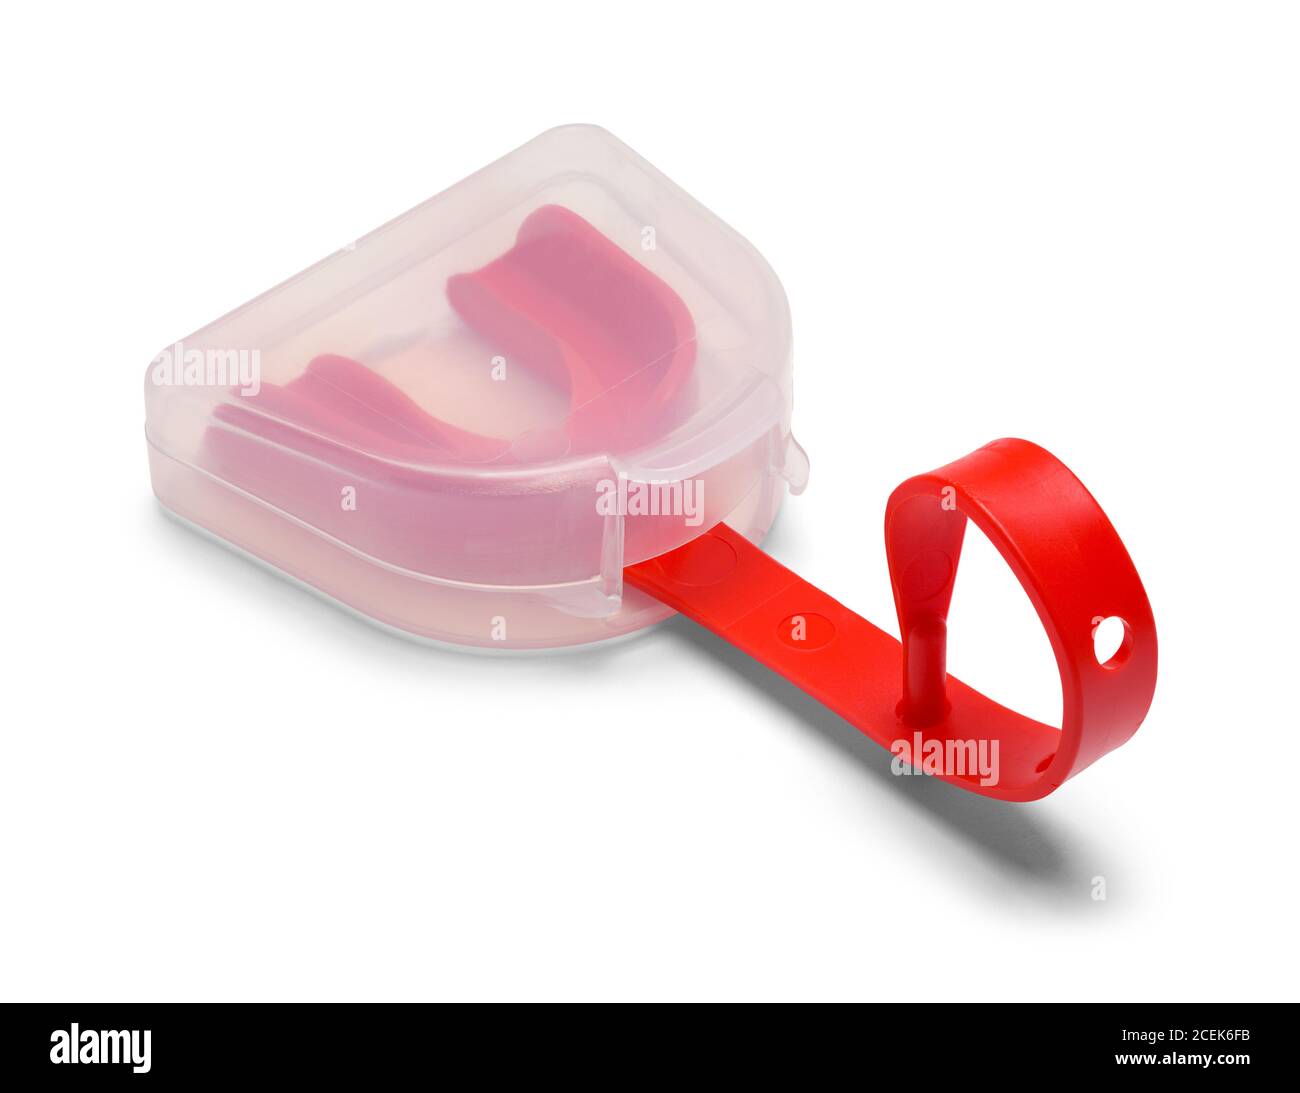 Red Sports Mouth Guard in Case Isolated on White. Stock Photo